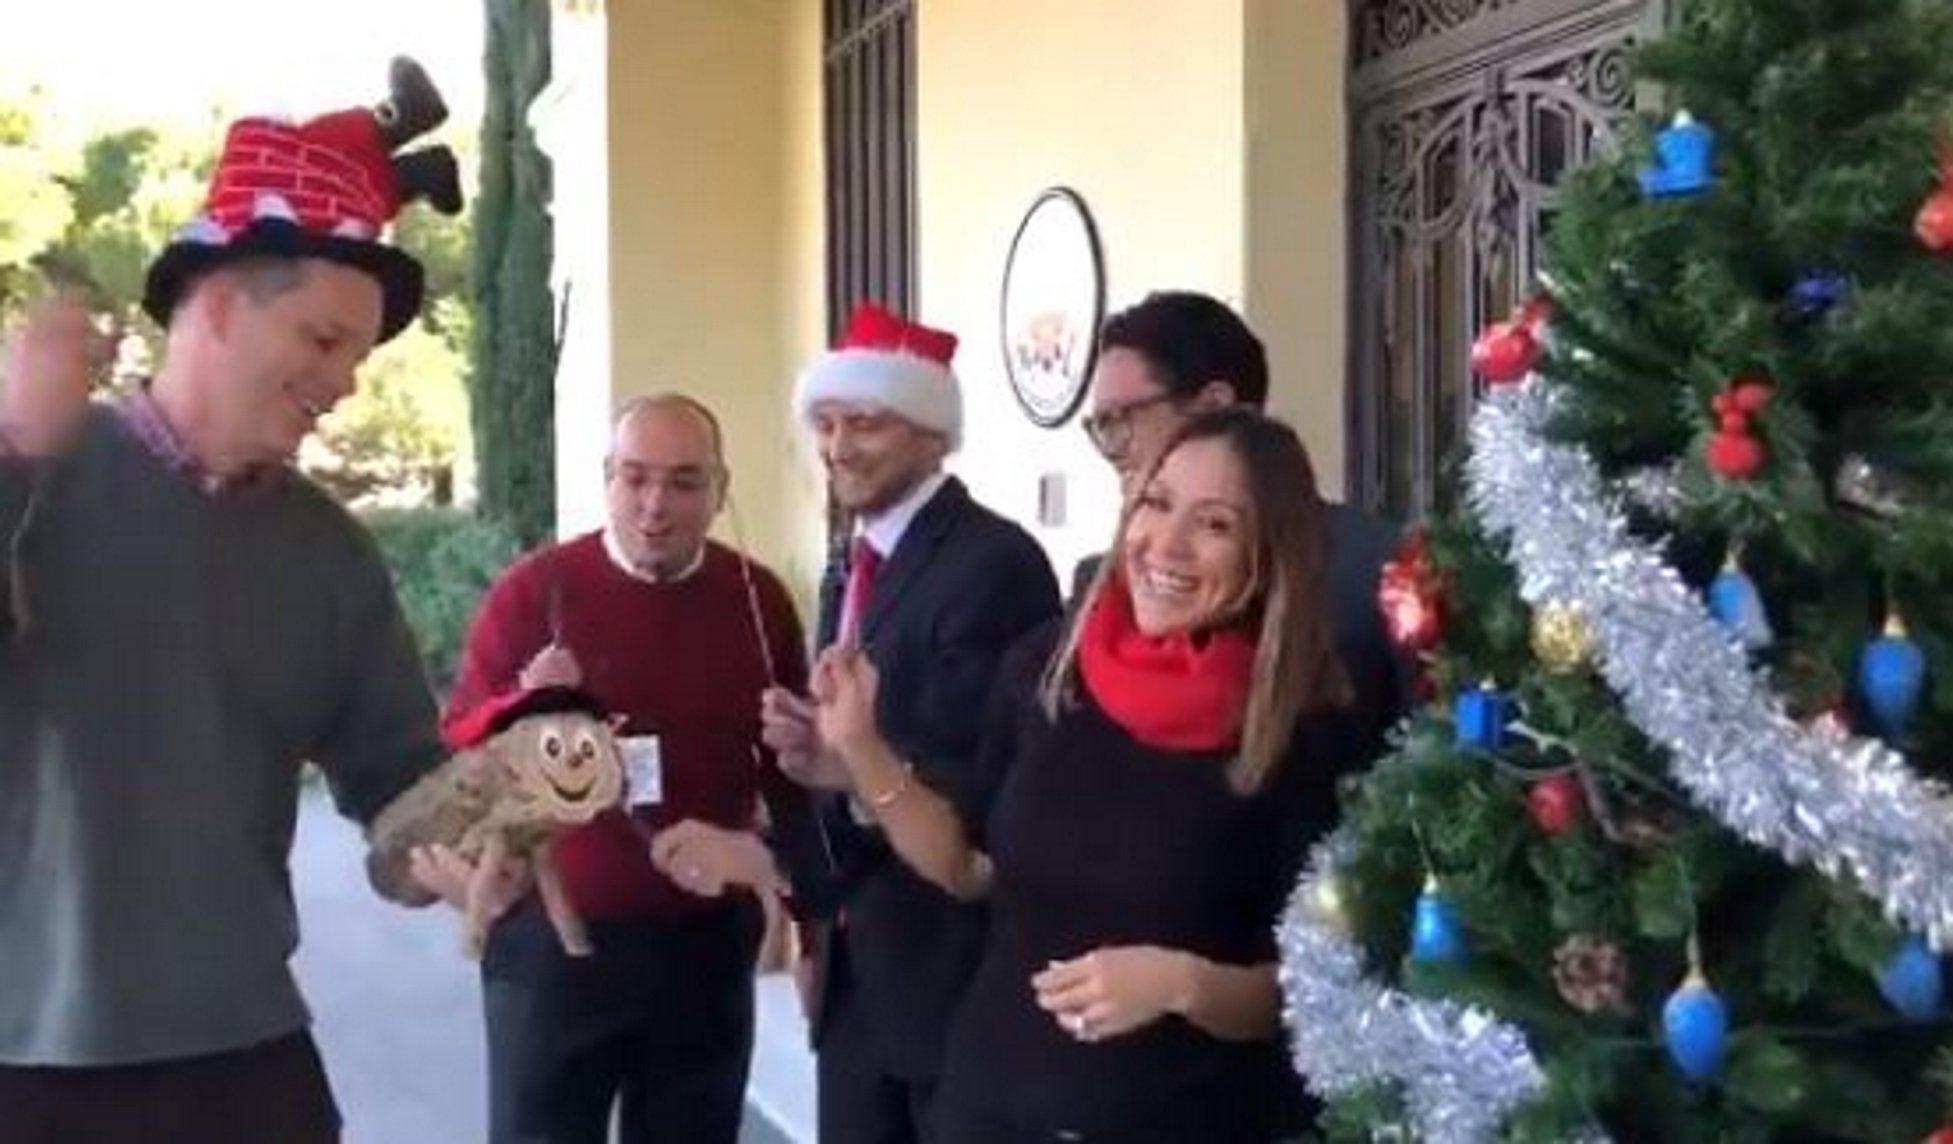 Barcelona's US consulate celebrates Christmas by making the log "poop"